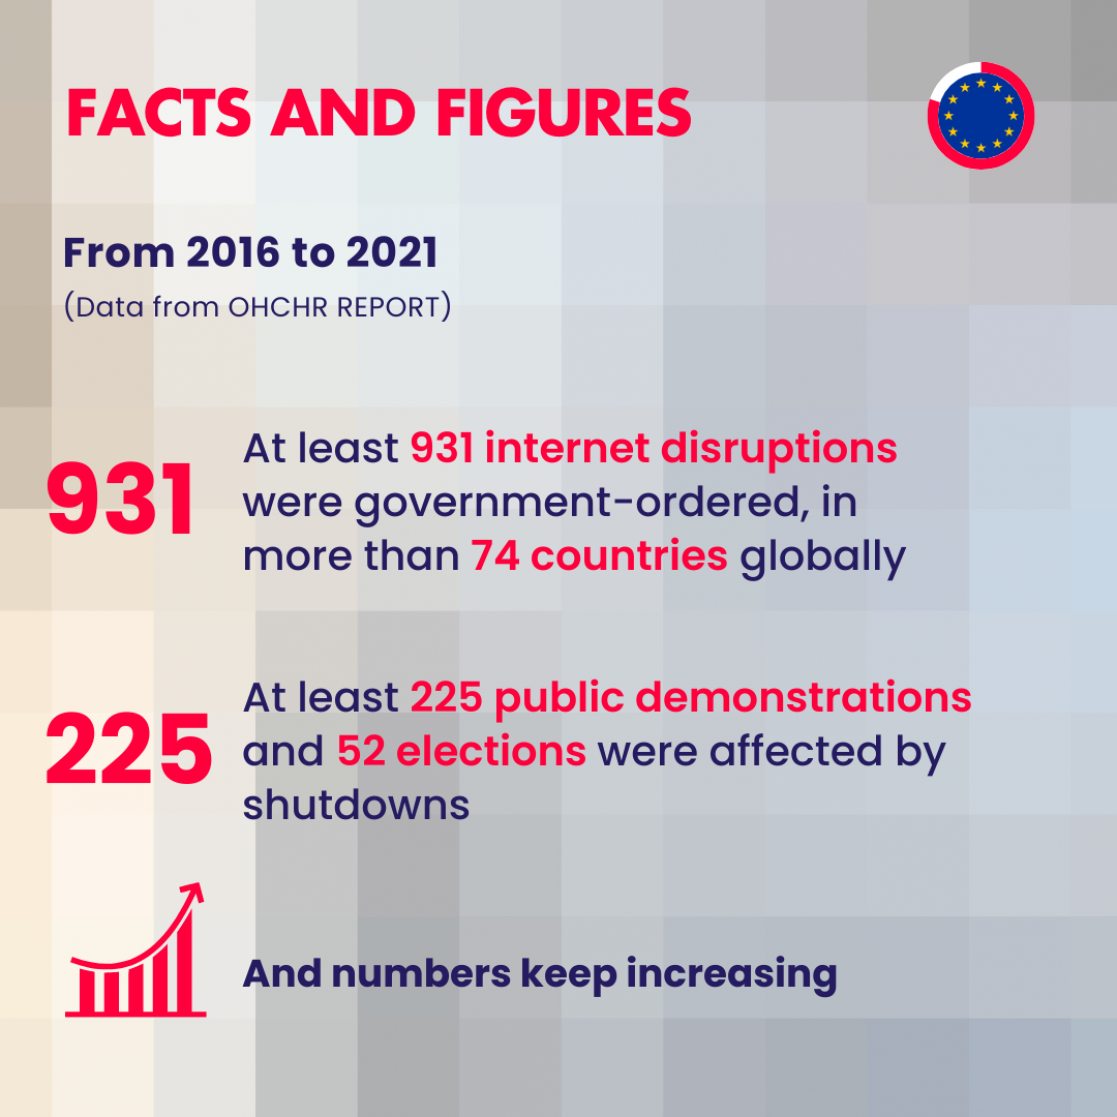 Facts and Figures related to Internet Shutdowns